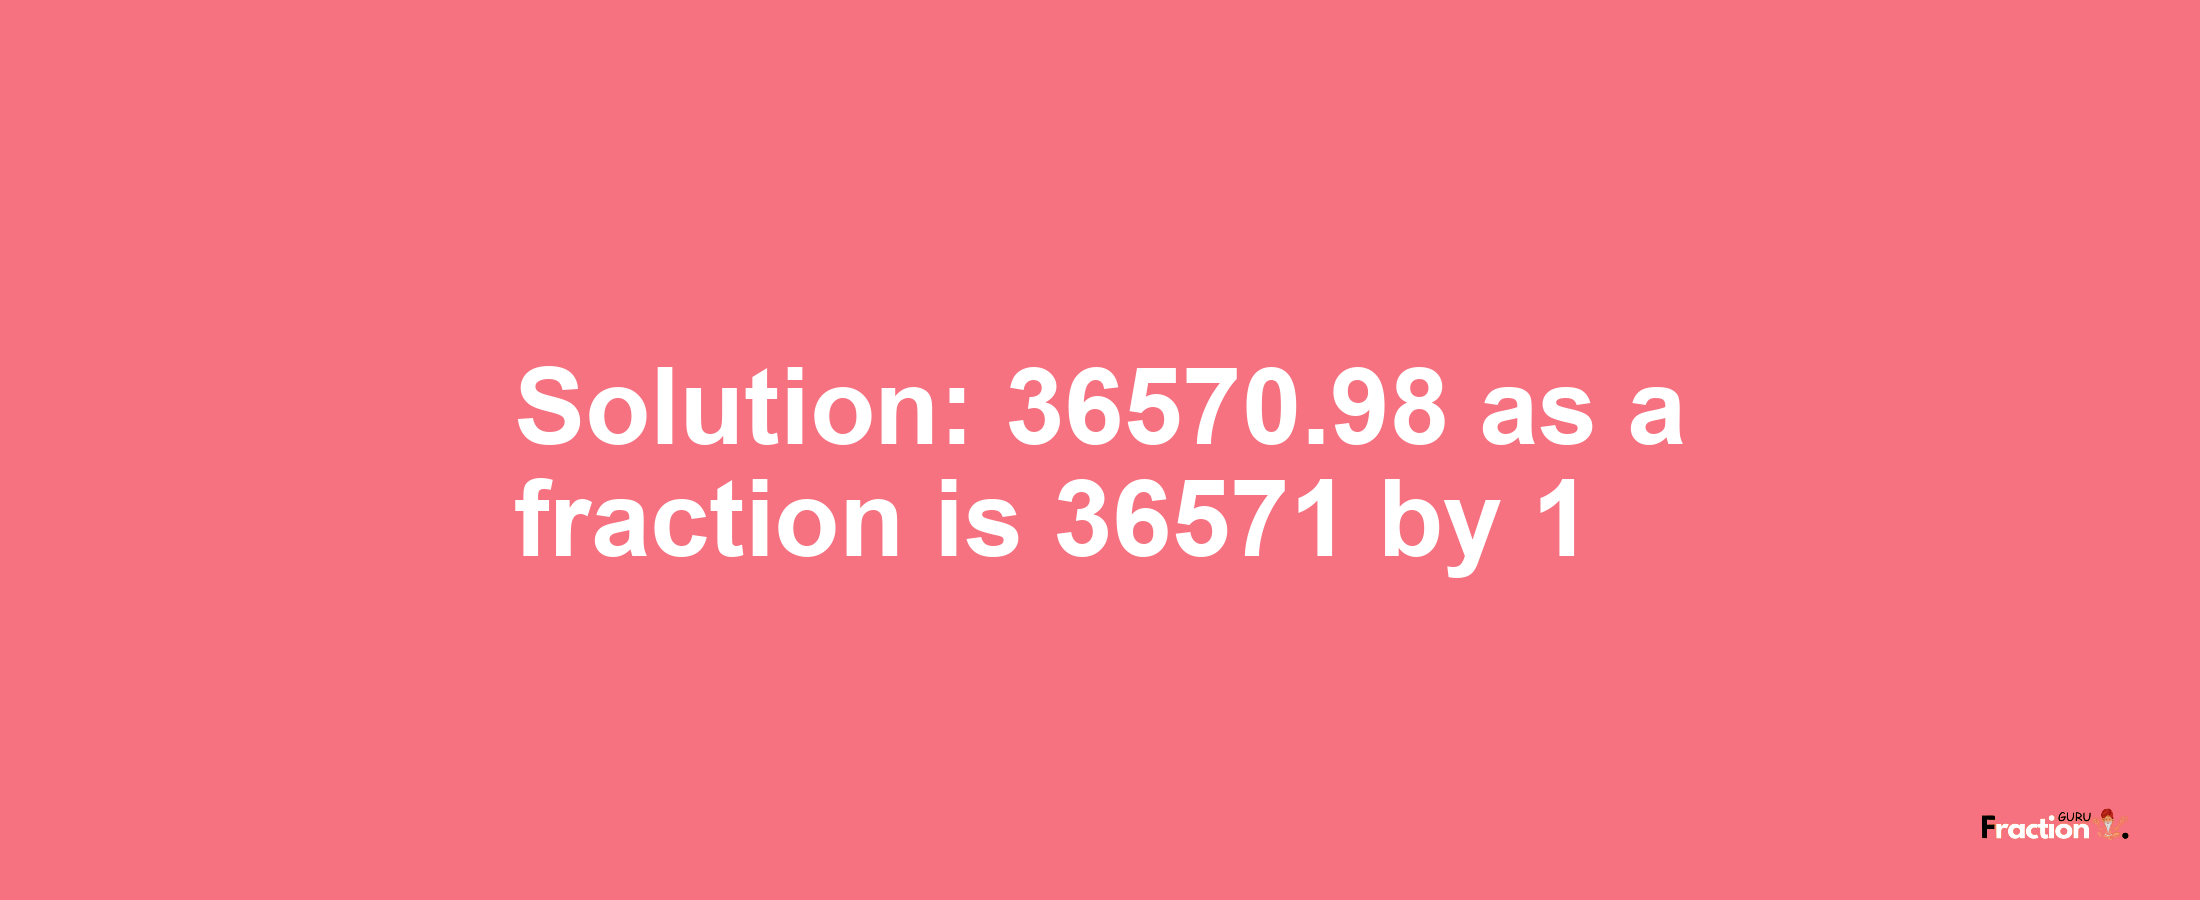 Solution:36570.98 as a fraction is 36571/1